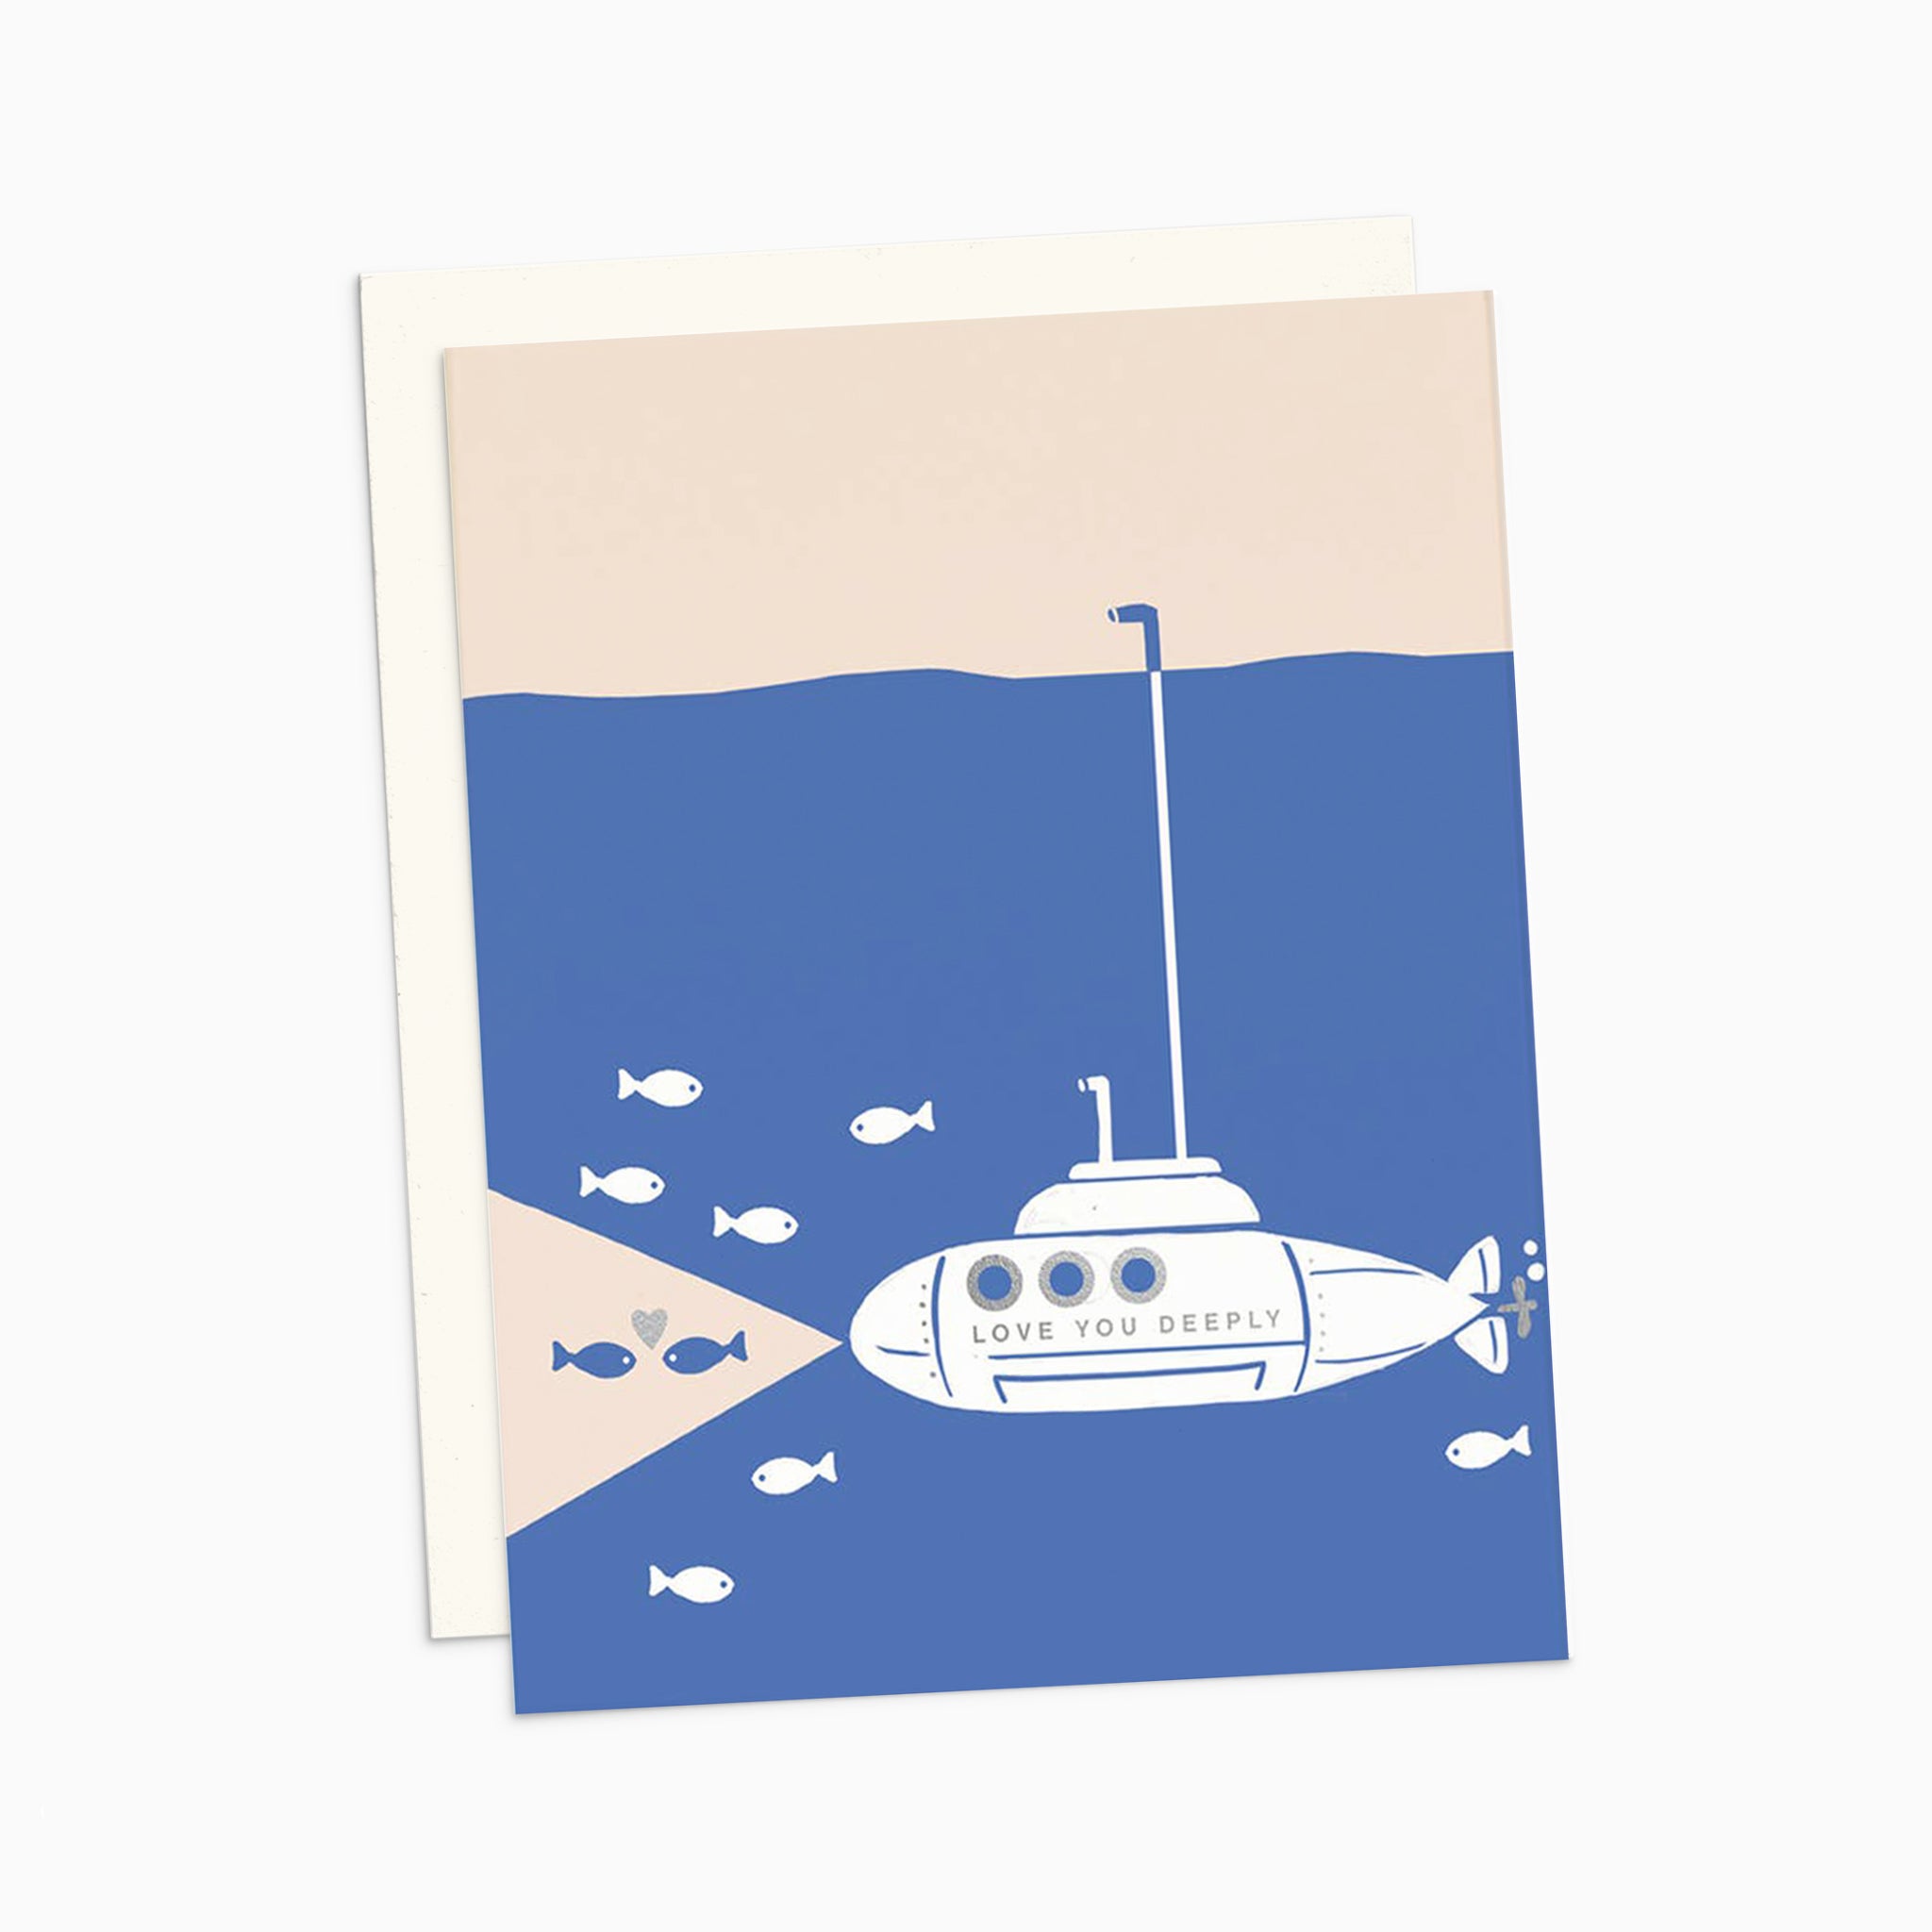 Illustrated love card on warm white premium cardstock, featuring a submarine underwater with fish, and two fish in the submarine's headlight beams sharing a heart, with the text 'Love You Deeply.